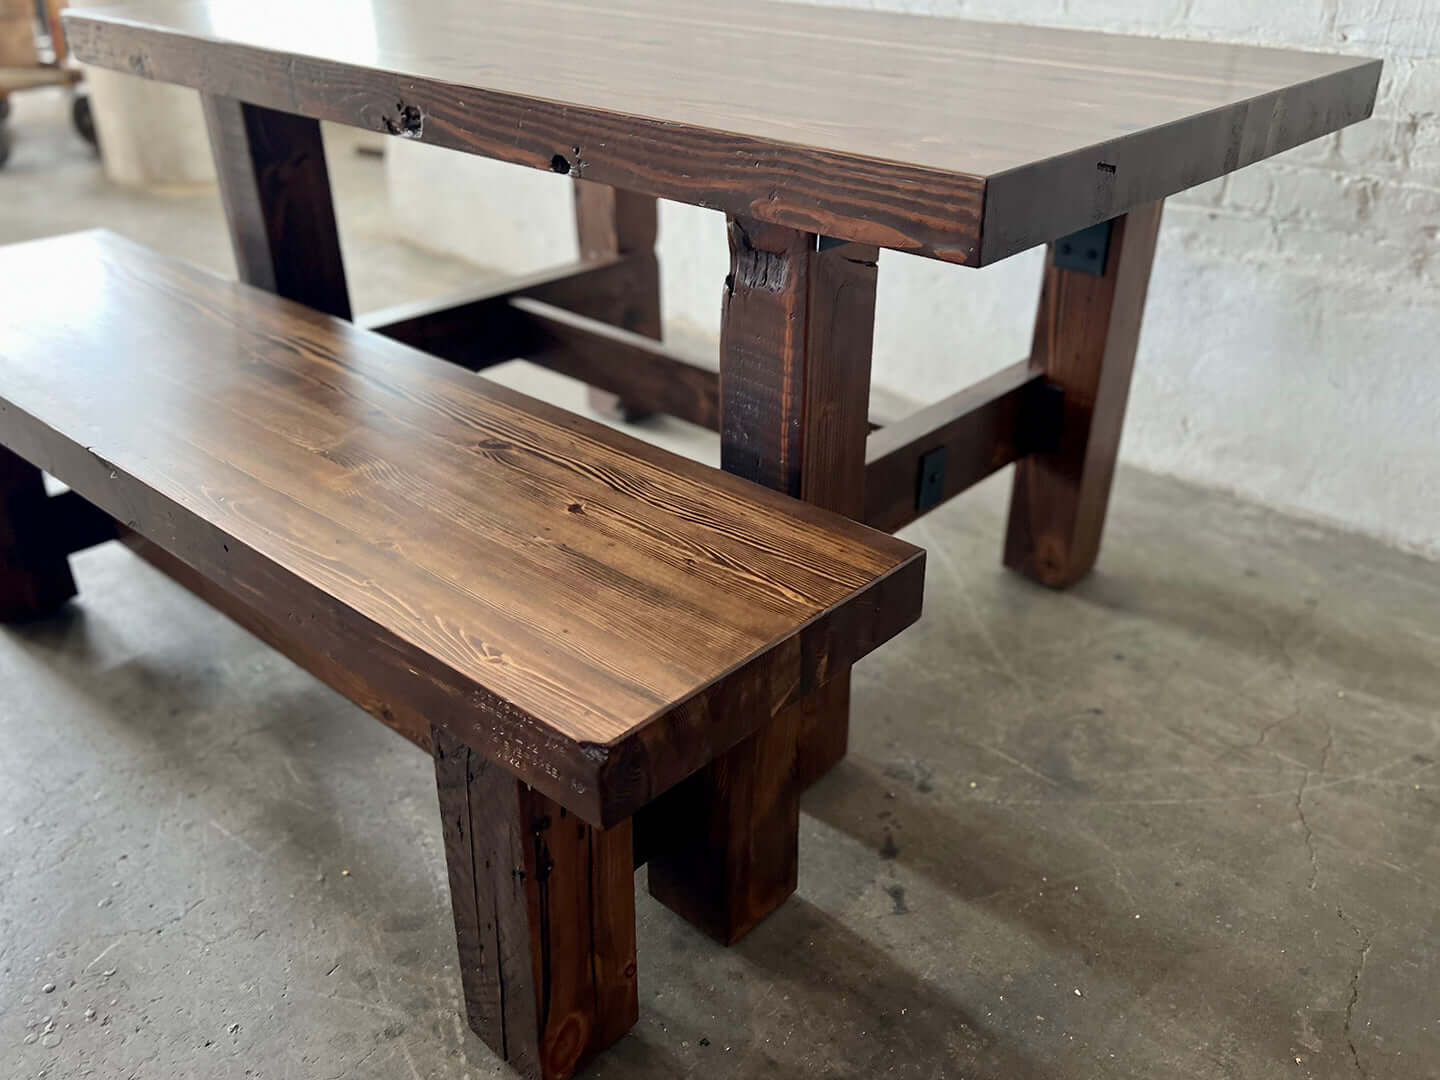 Ambassador Reclaimed Wood Table and Bench Set - Walnut Stain Finish